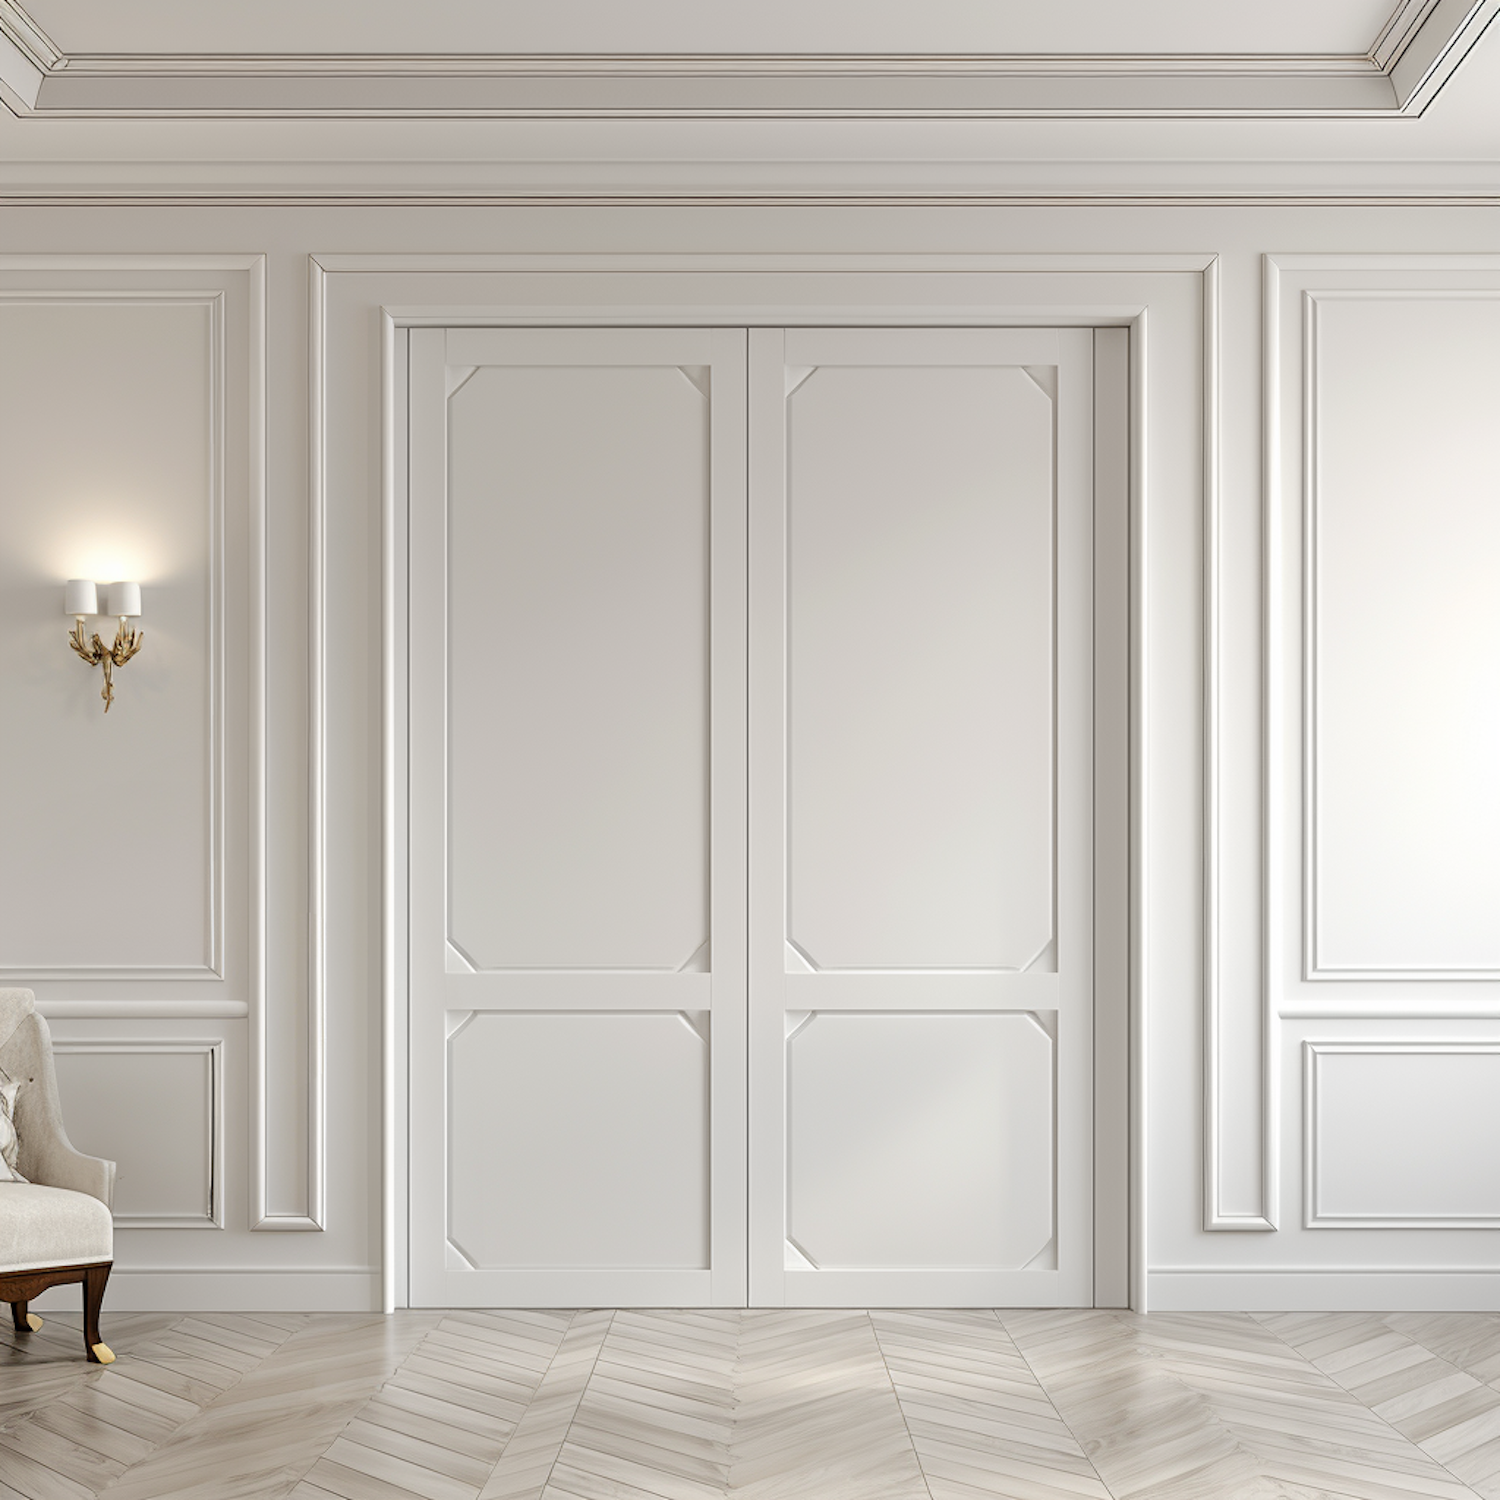 Elegant Wainscoted Room with White Double Doors